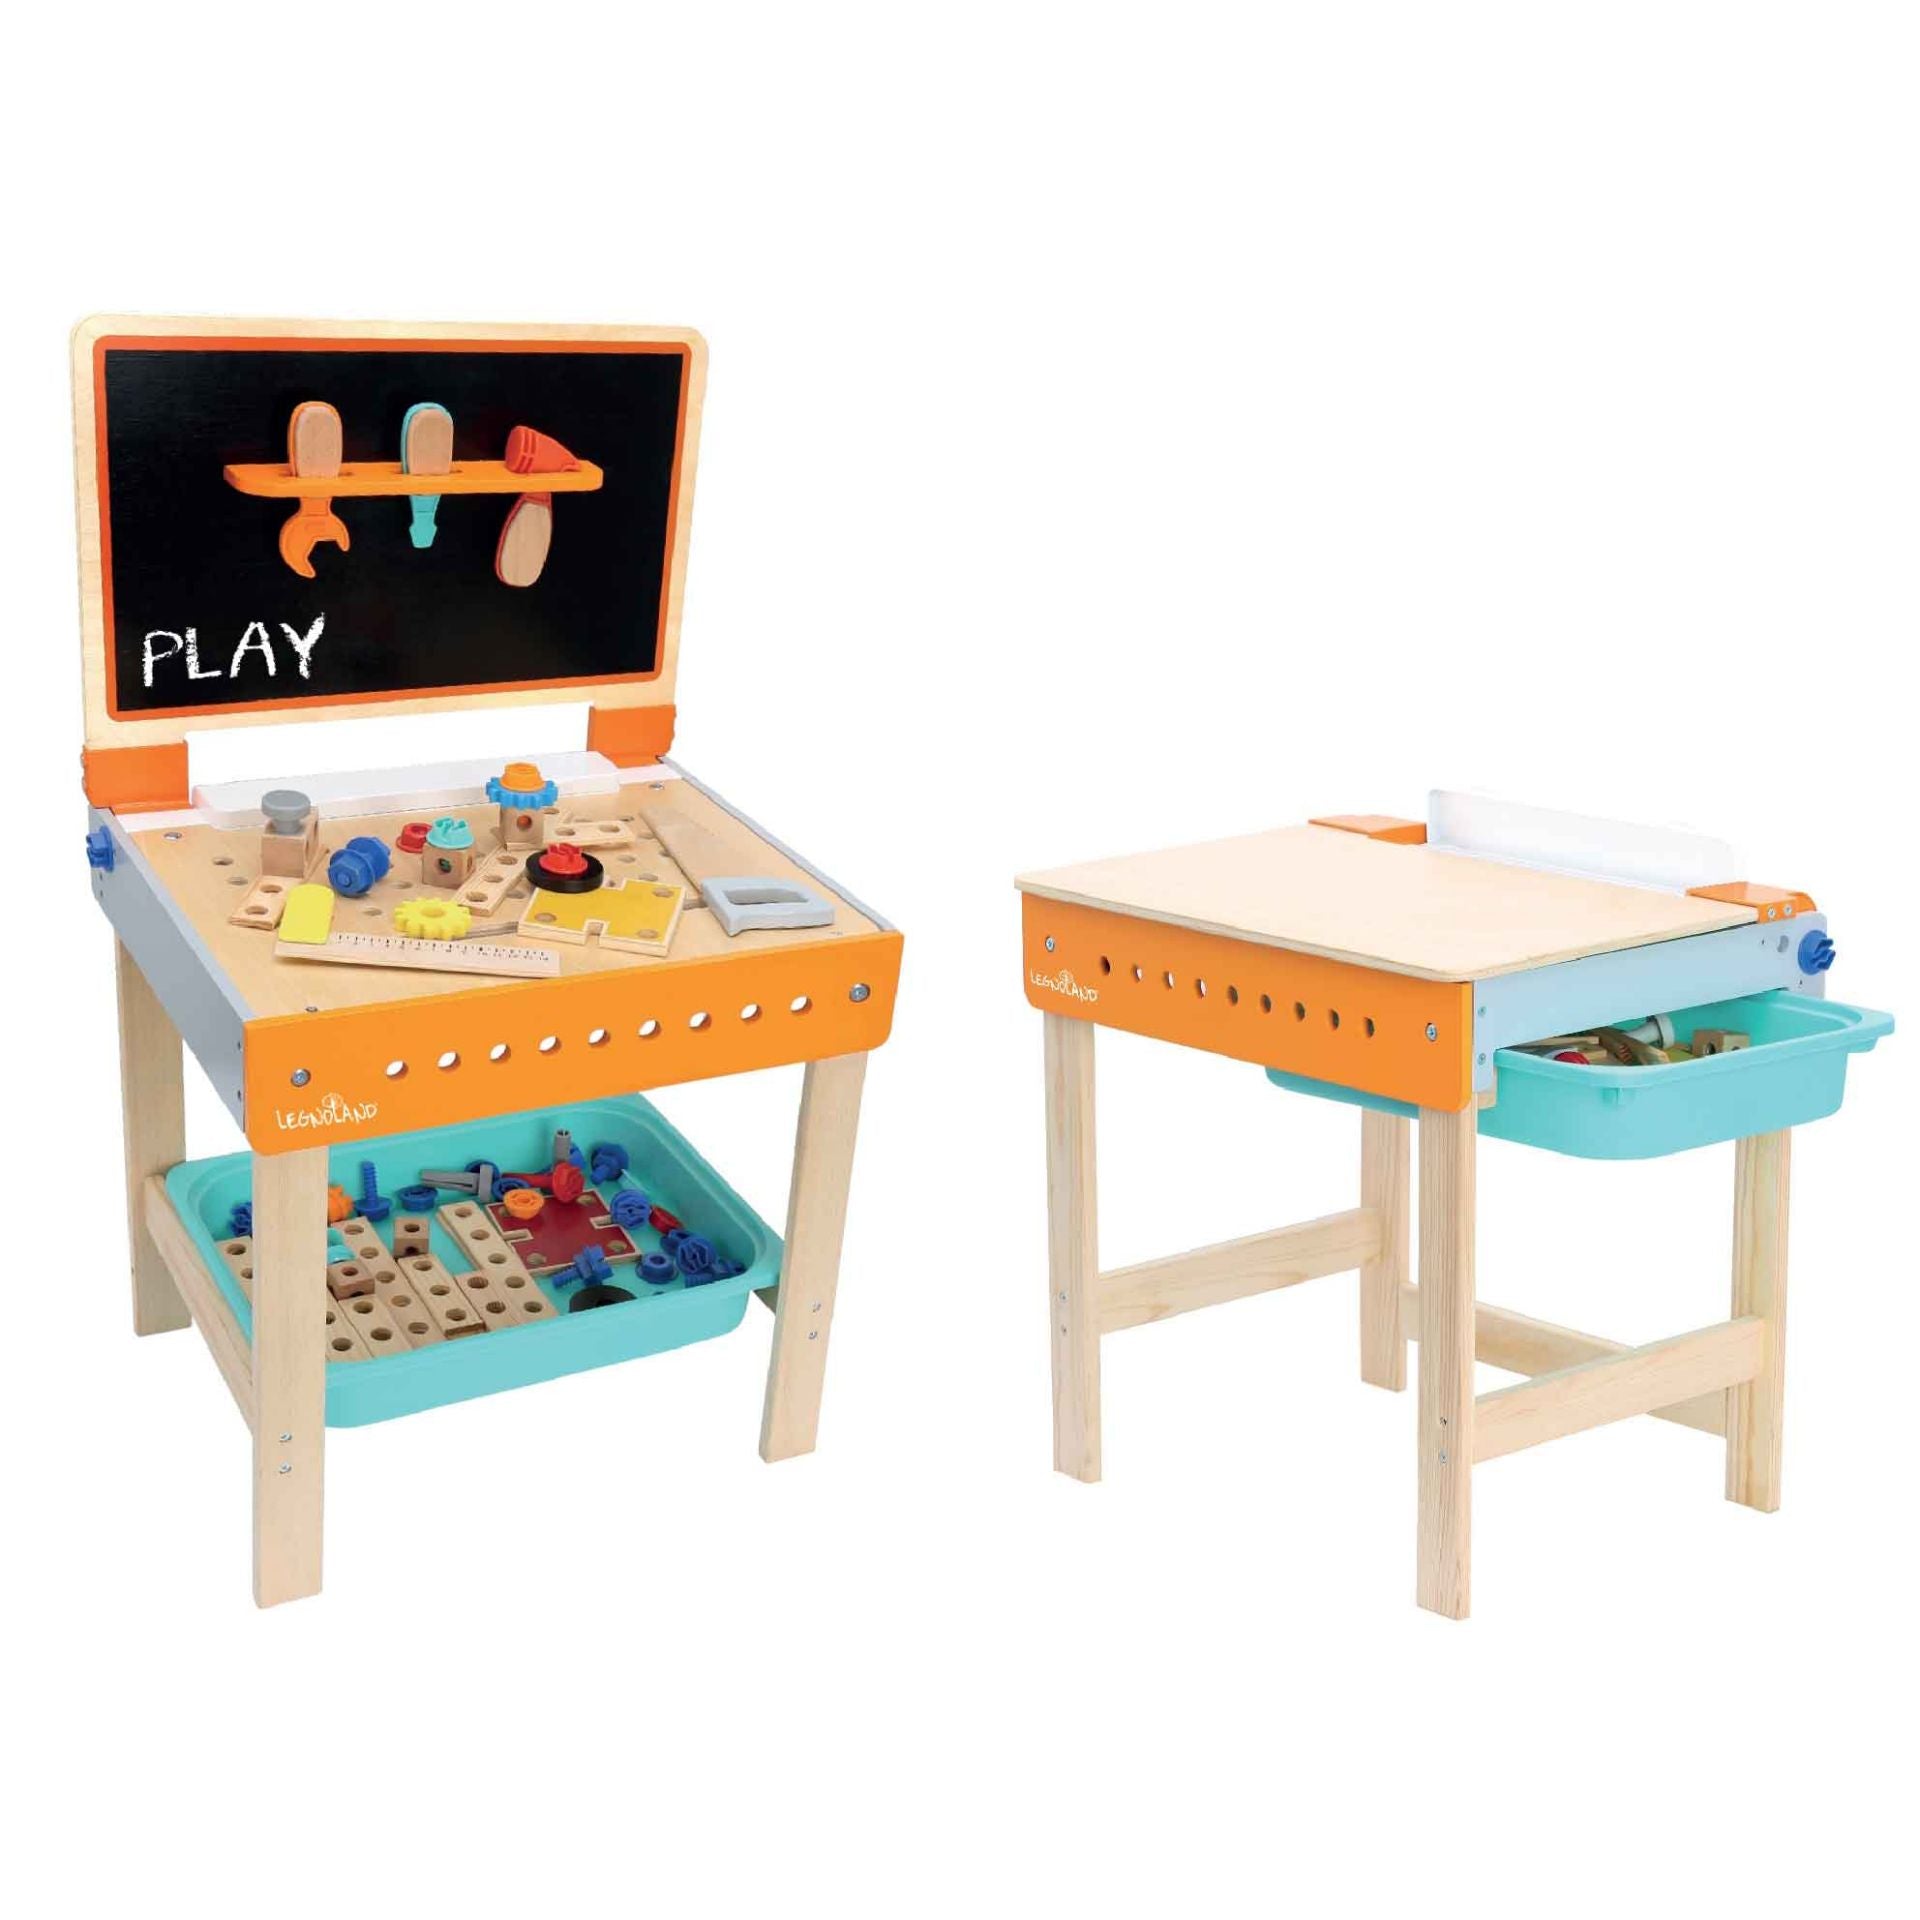 Wooden Workbench & Table - 2 in 1, 53Pcs